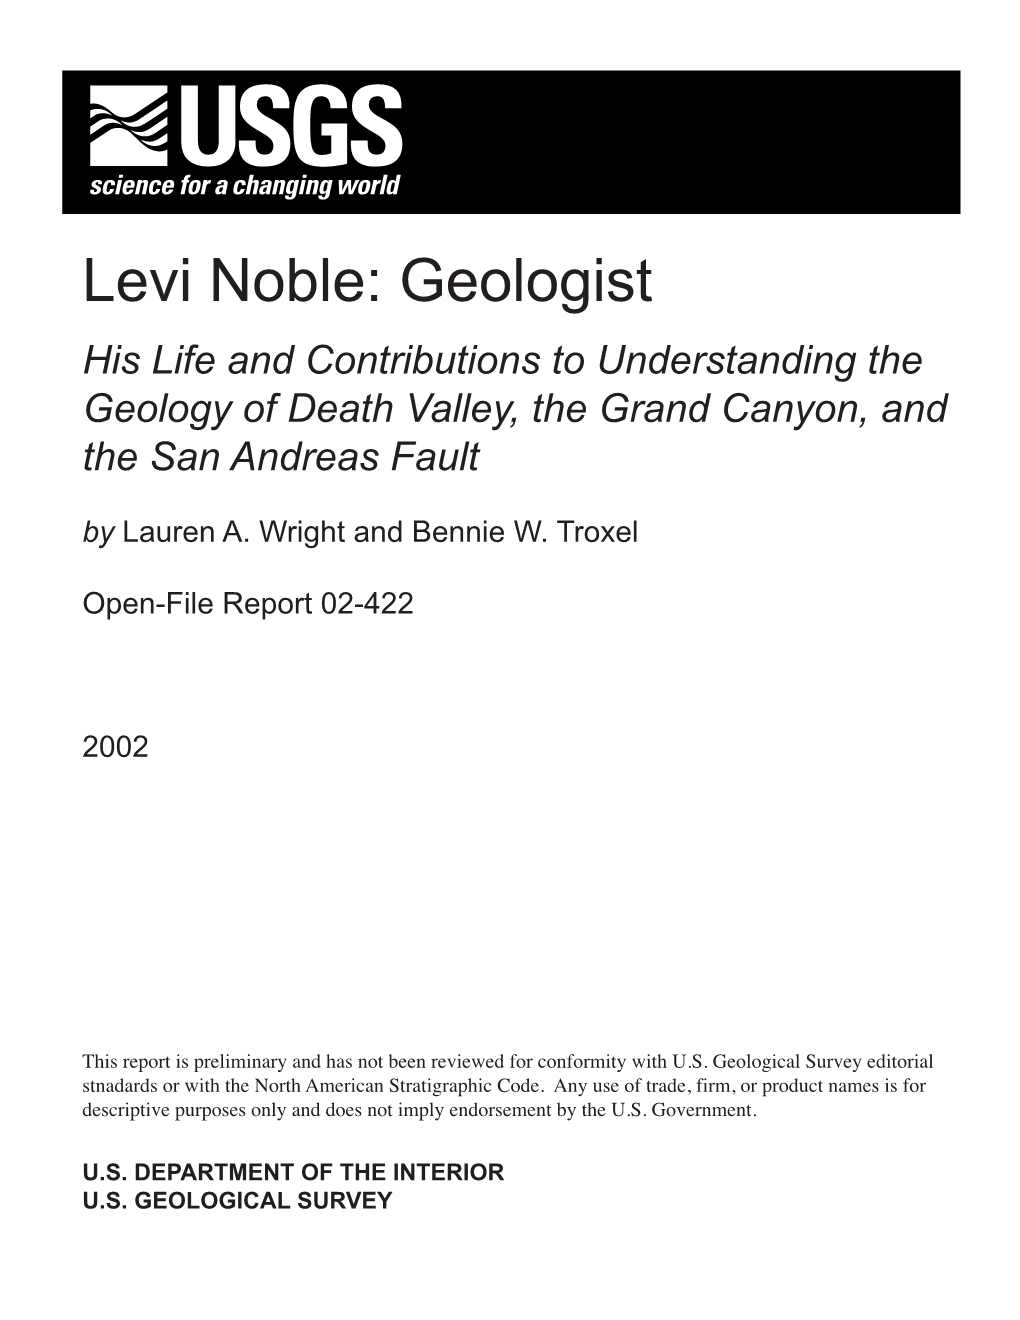 Levi Noble: Geologist His Life and Contributions to Understanding the Geology of Death Valley, the Grand Canyon, and the San Andreas Fault by Lauren A